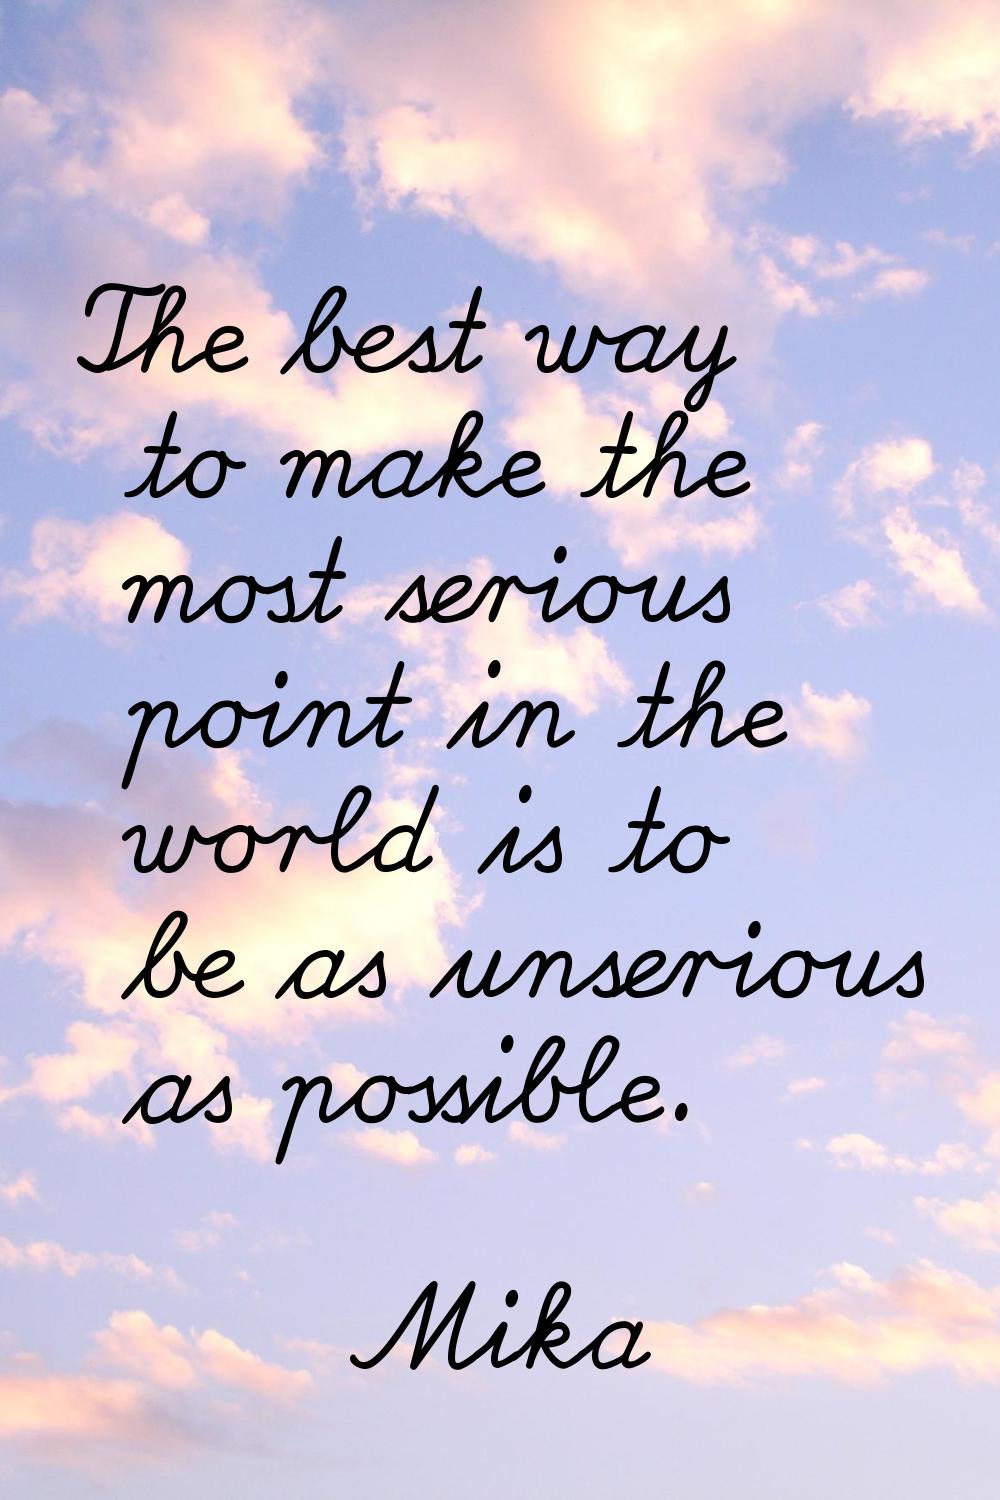 The best way to make the most serious point in the world is to be as unserious as possible.